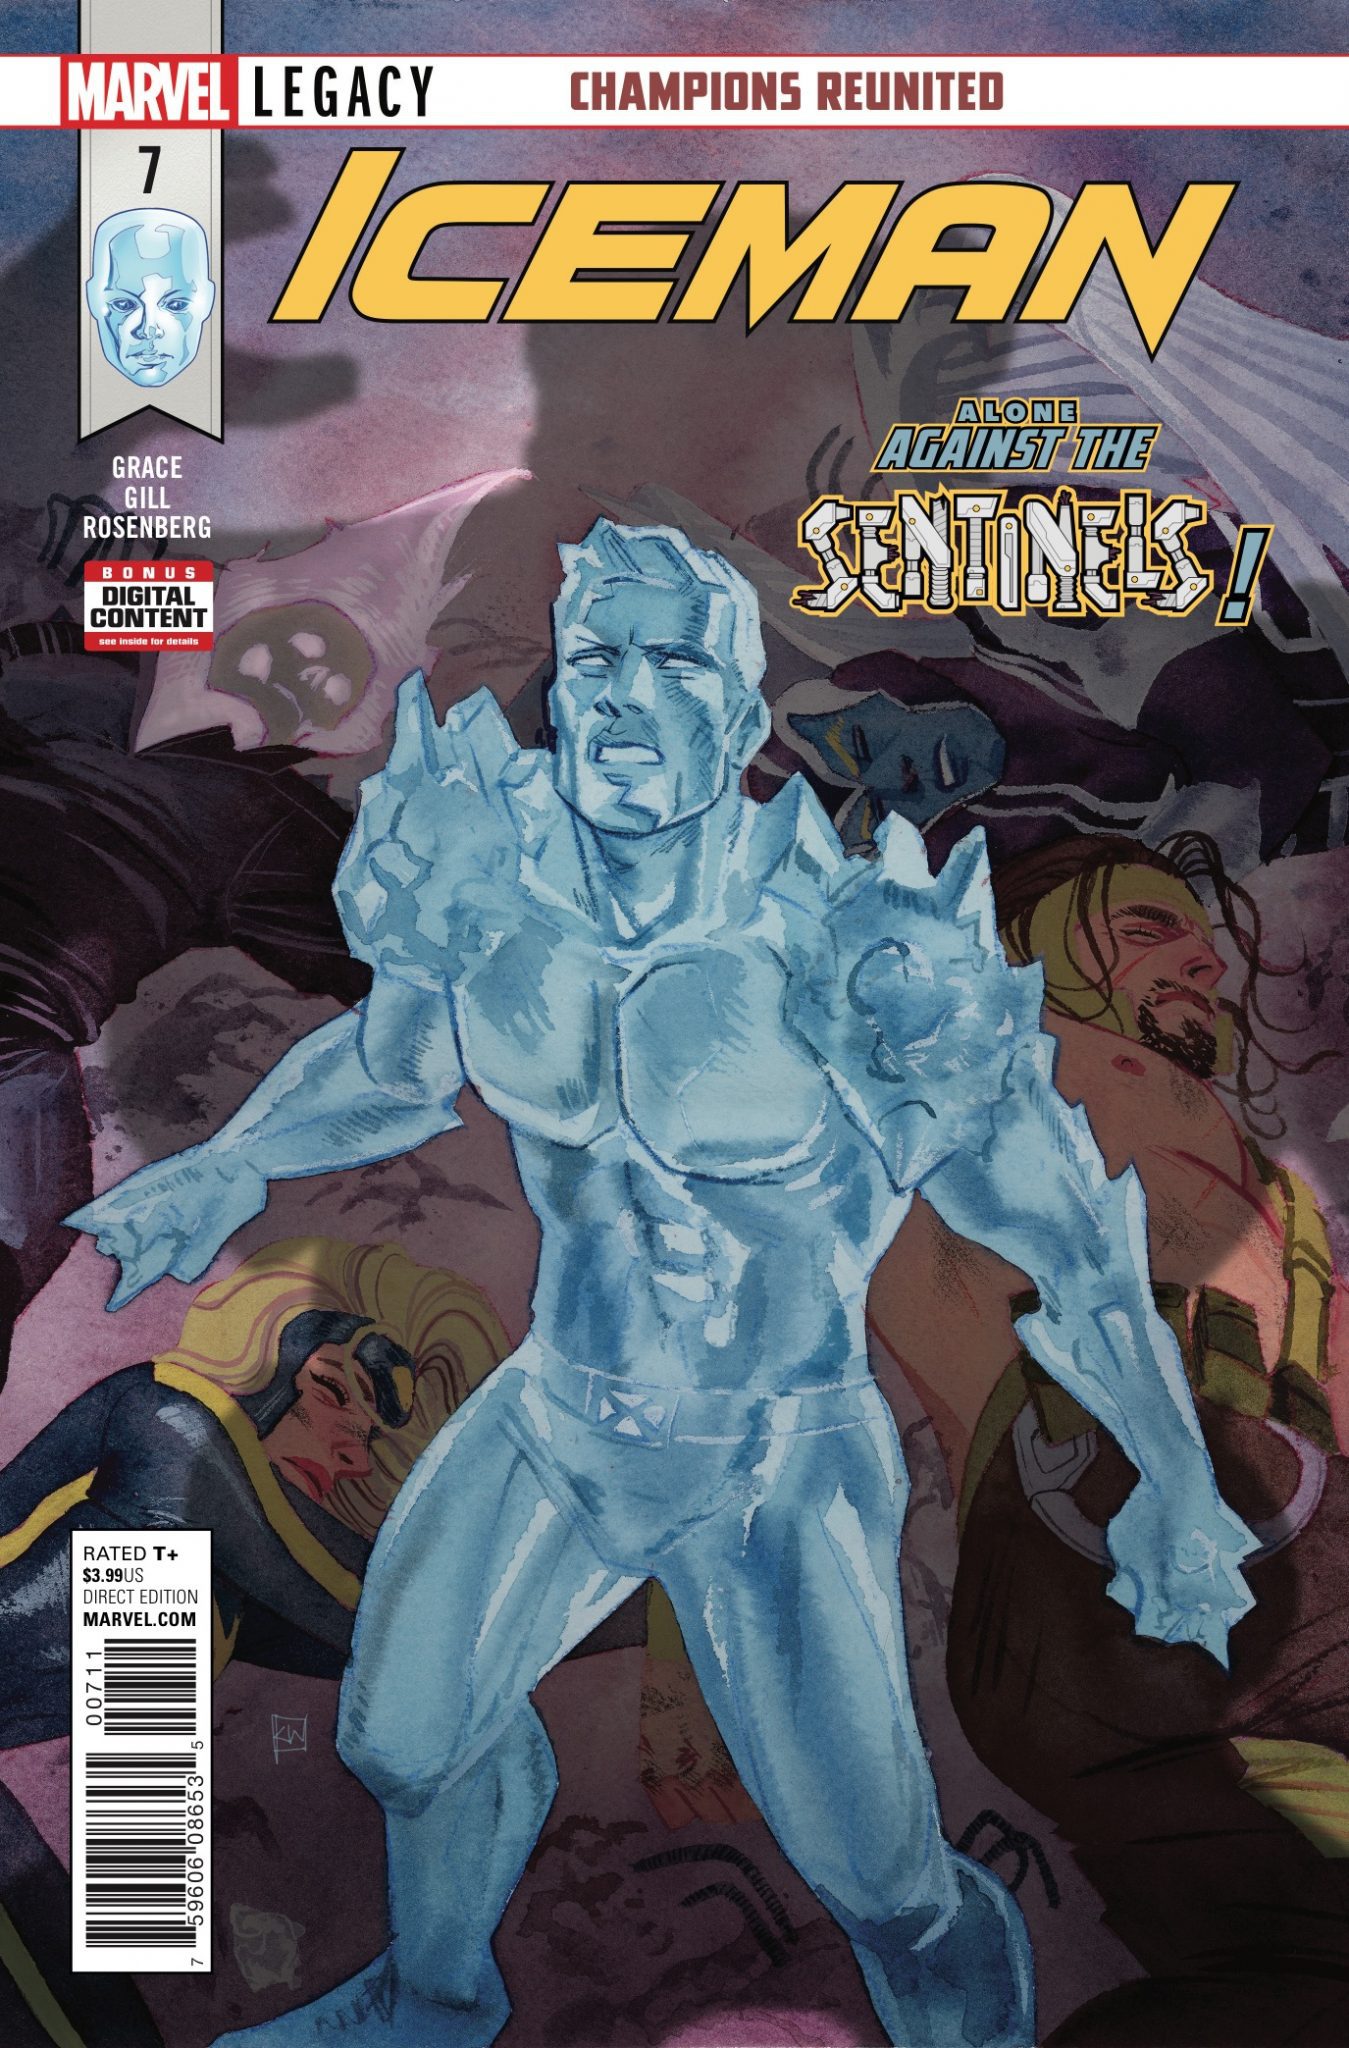 Iceman #7 Review